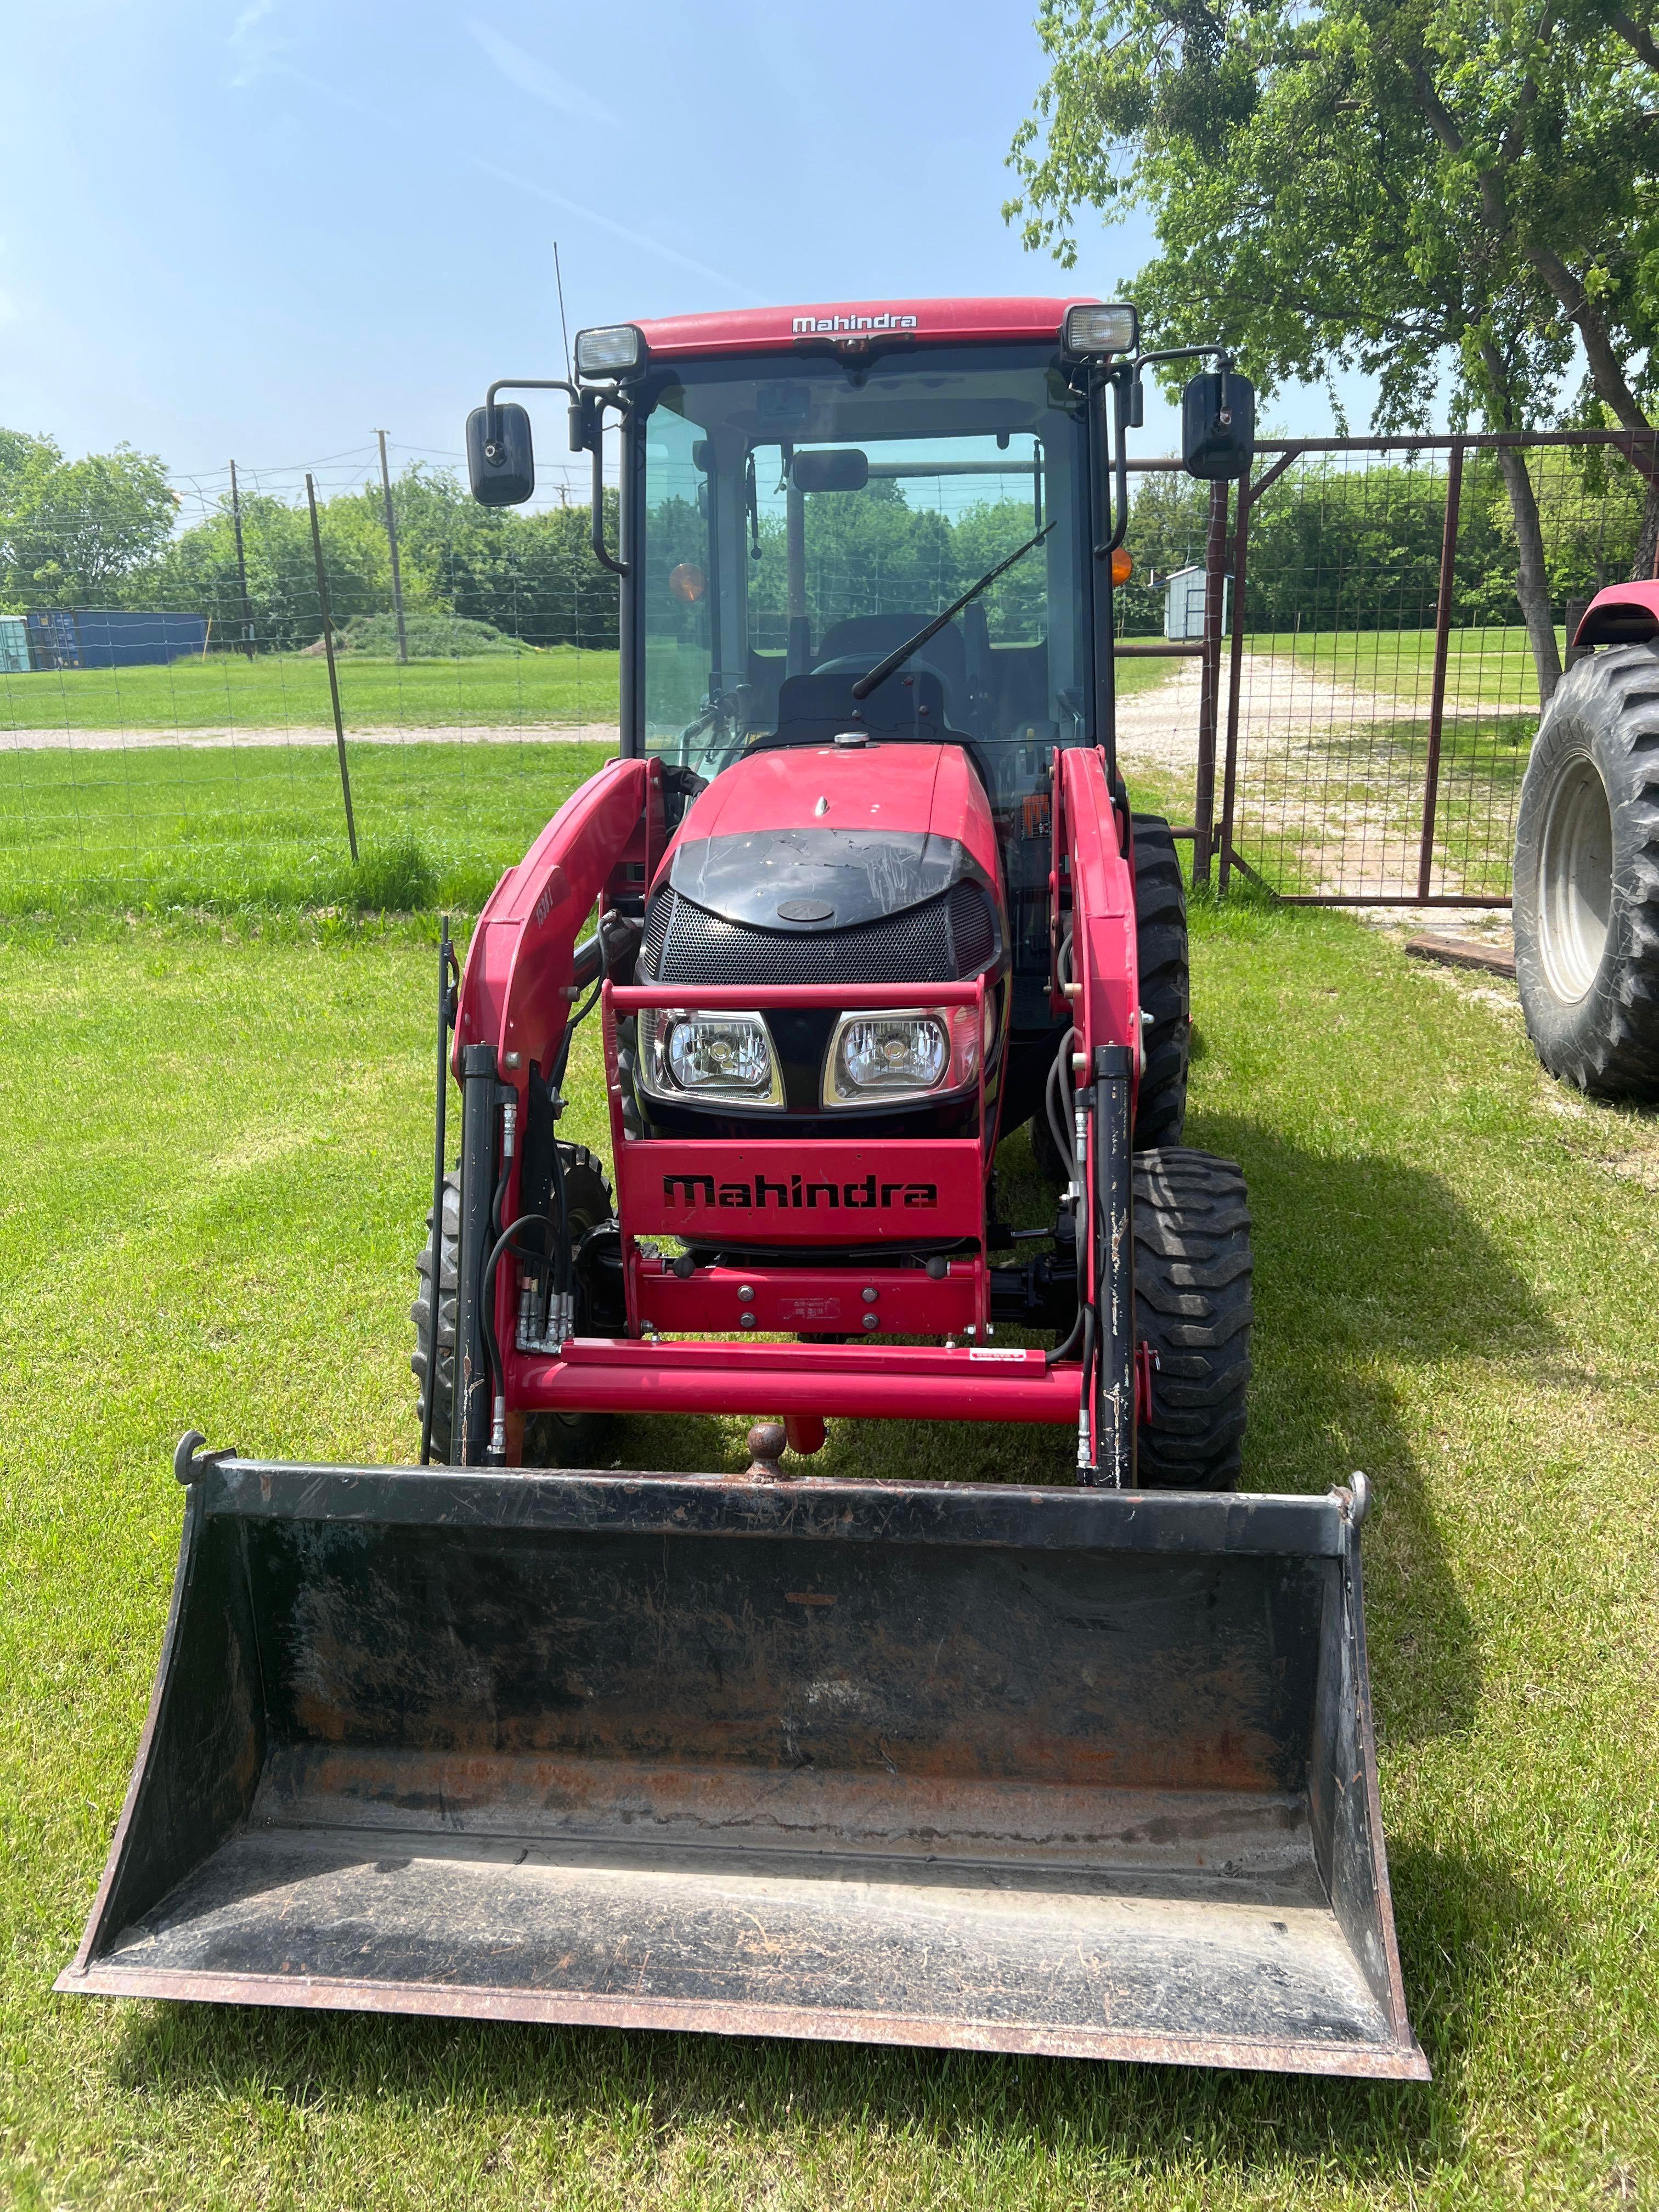 2013 Mahindra 1538 Tractor with Front Loader and 6 foot Finish Mower - 550.9 hours - Super clean.